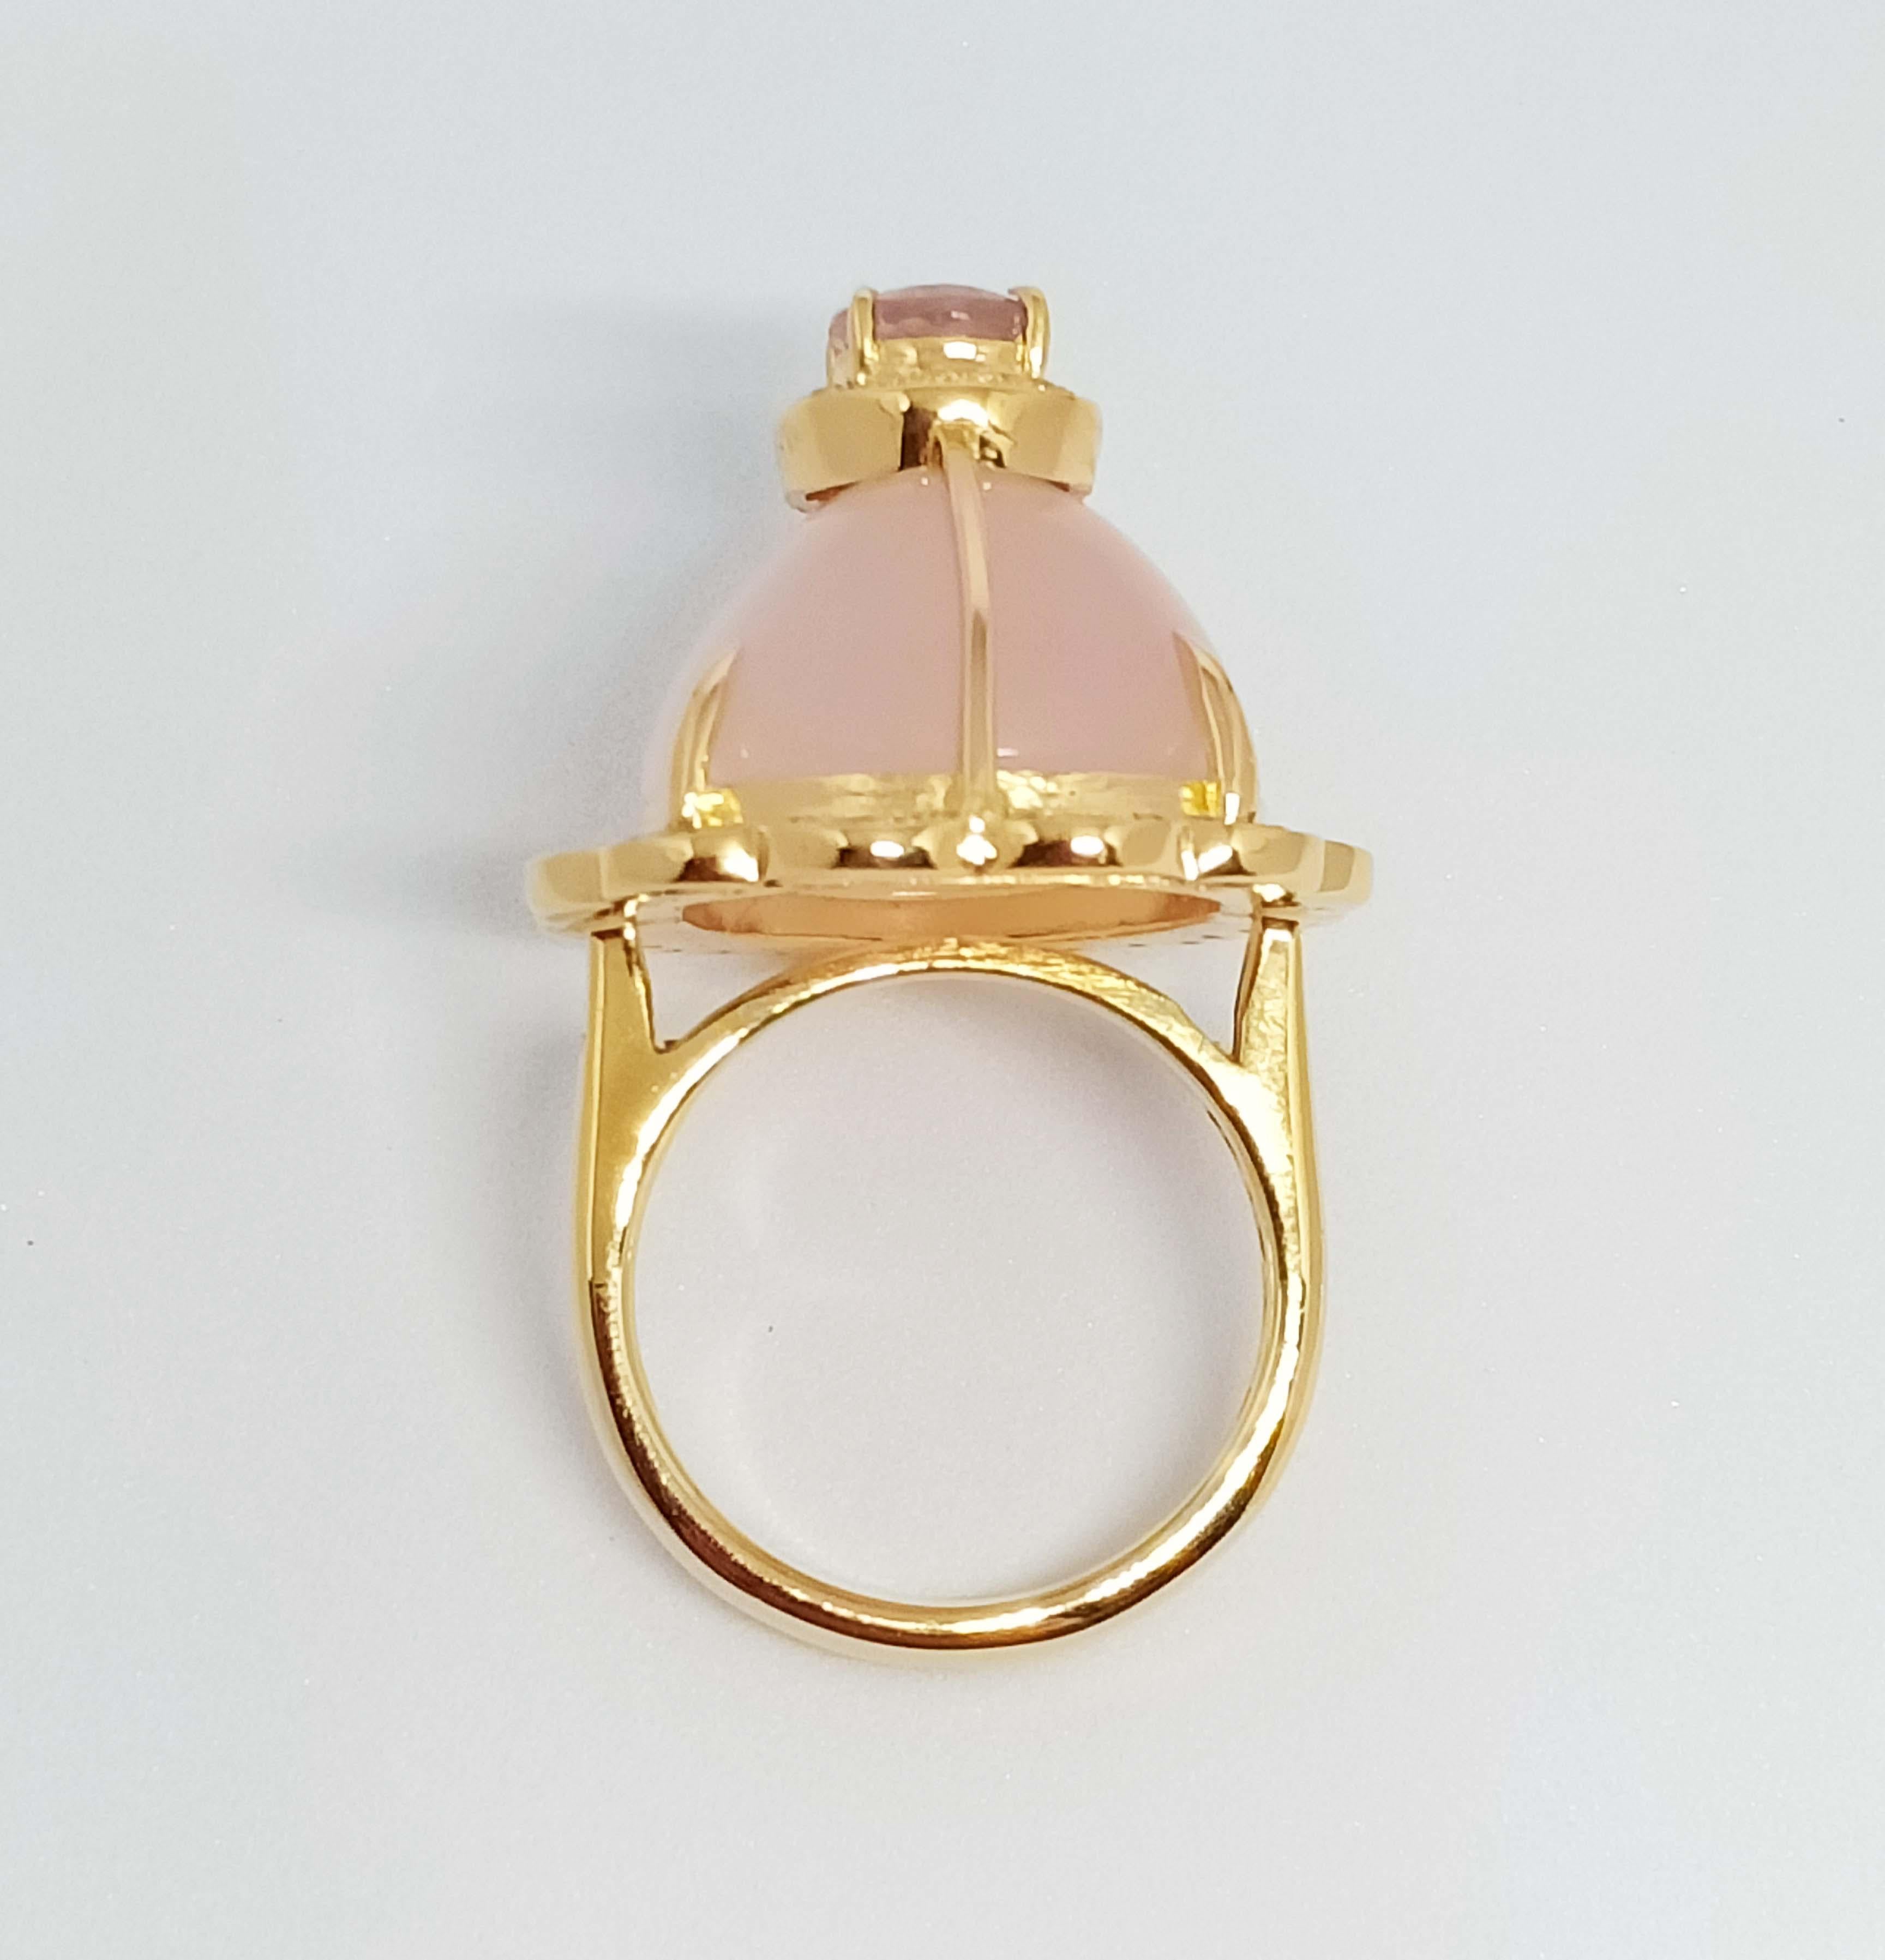 Women's 33.43 Cts. Rose Quartz Ring. Sterling Silver on 18K Gold Plated. For Sale